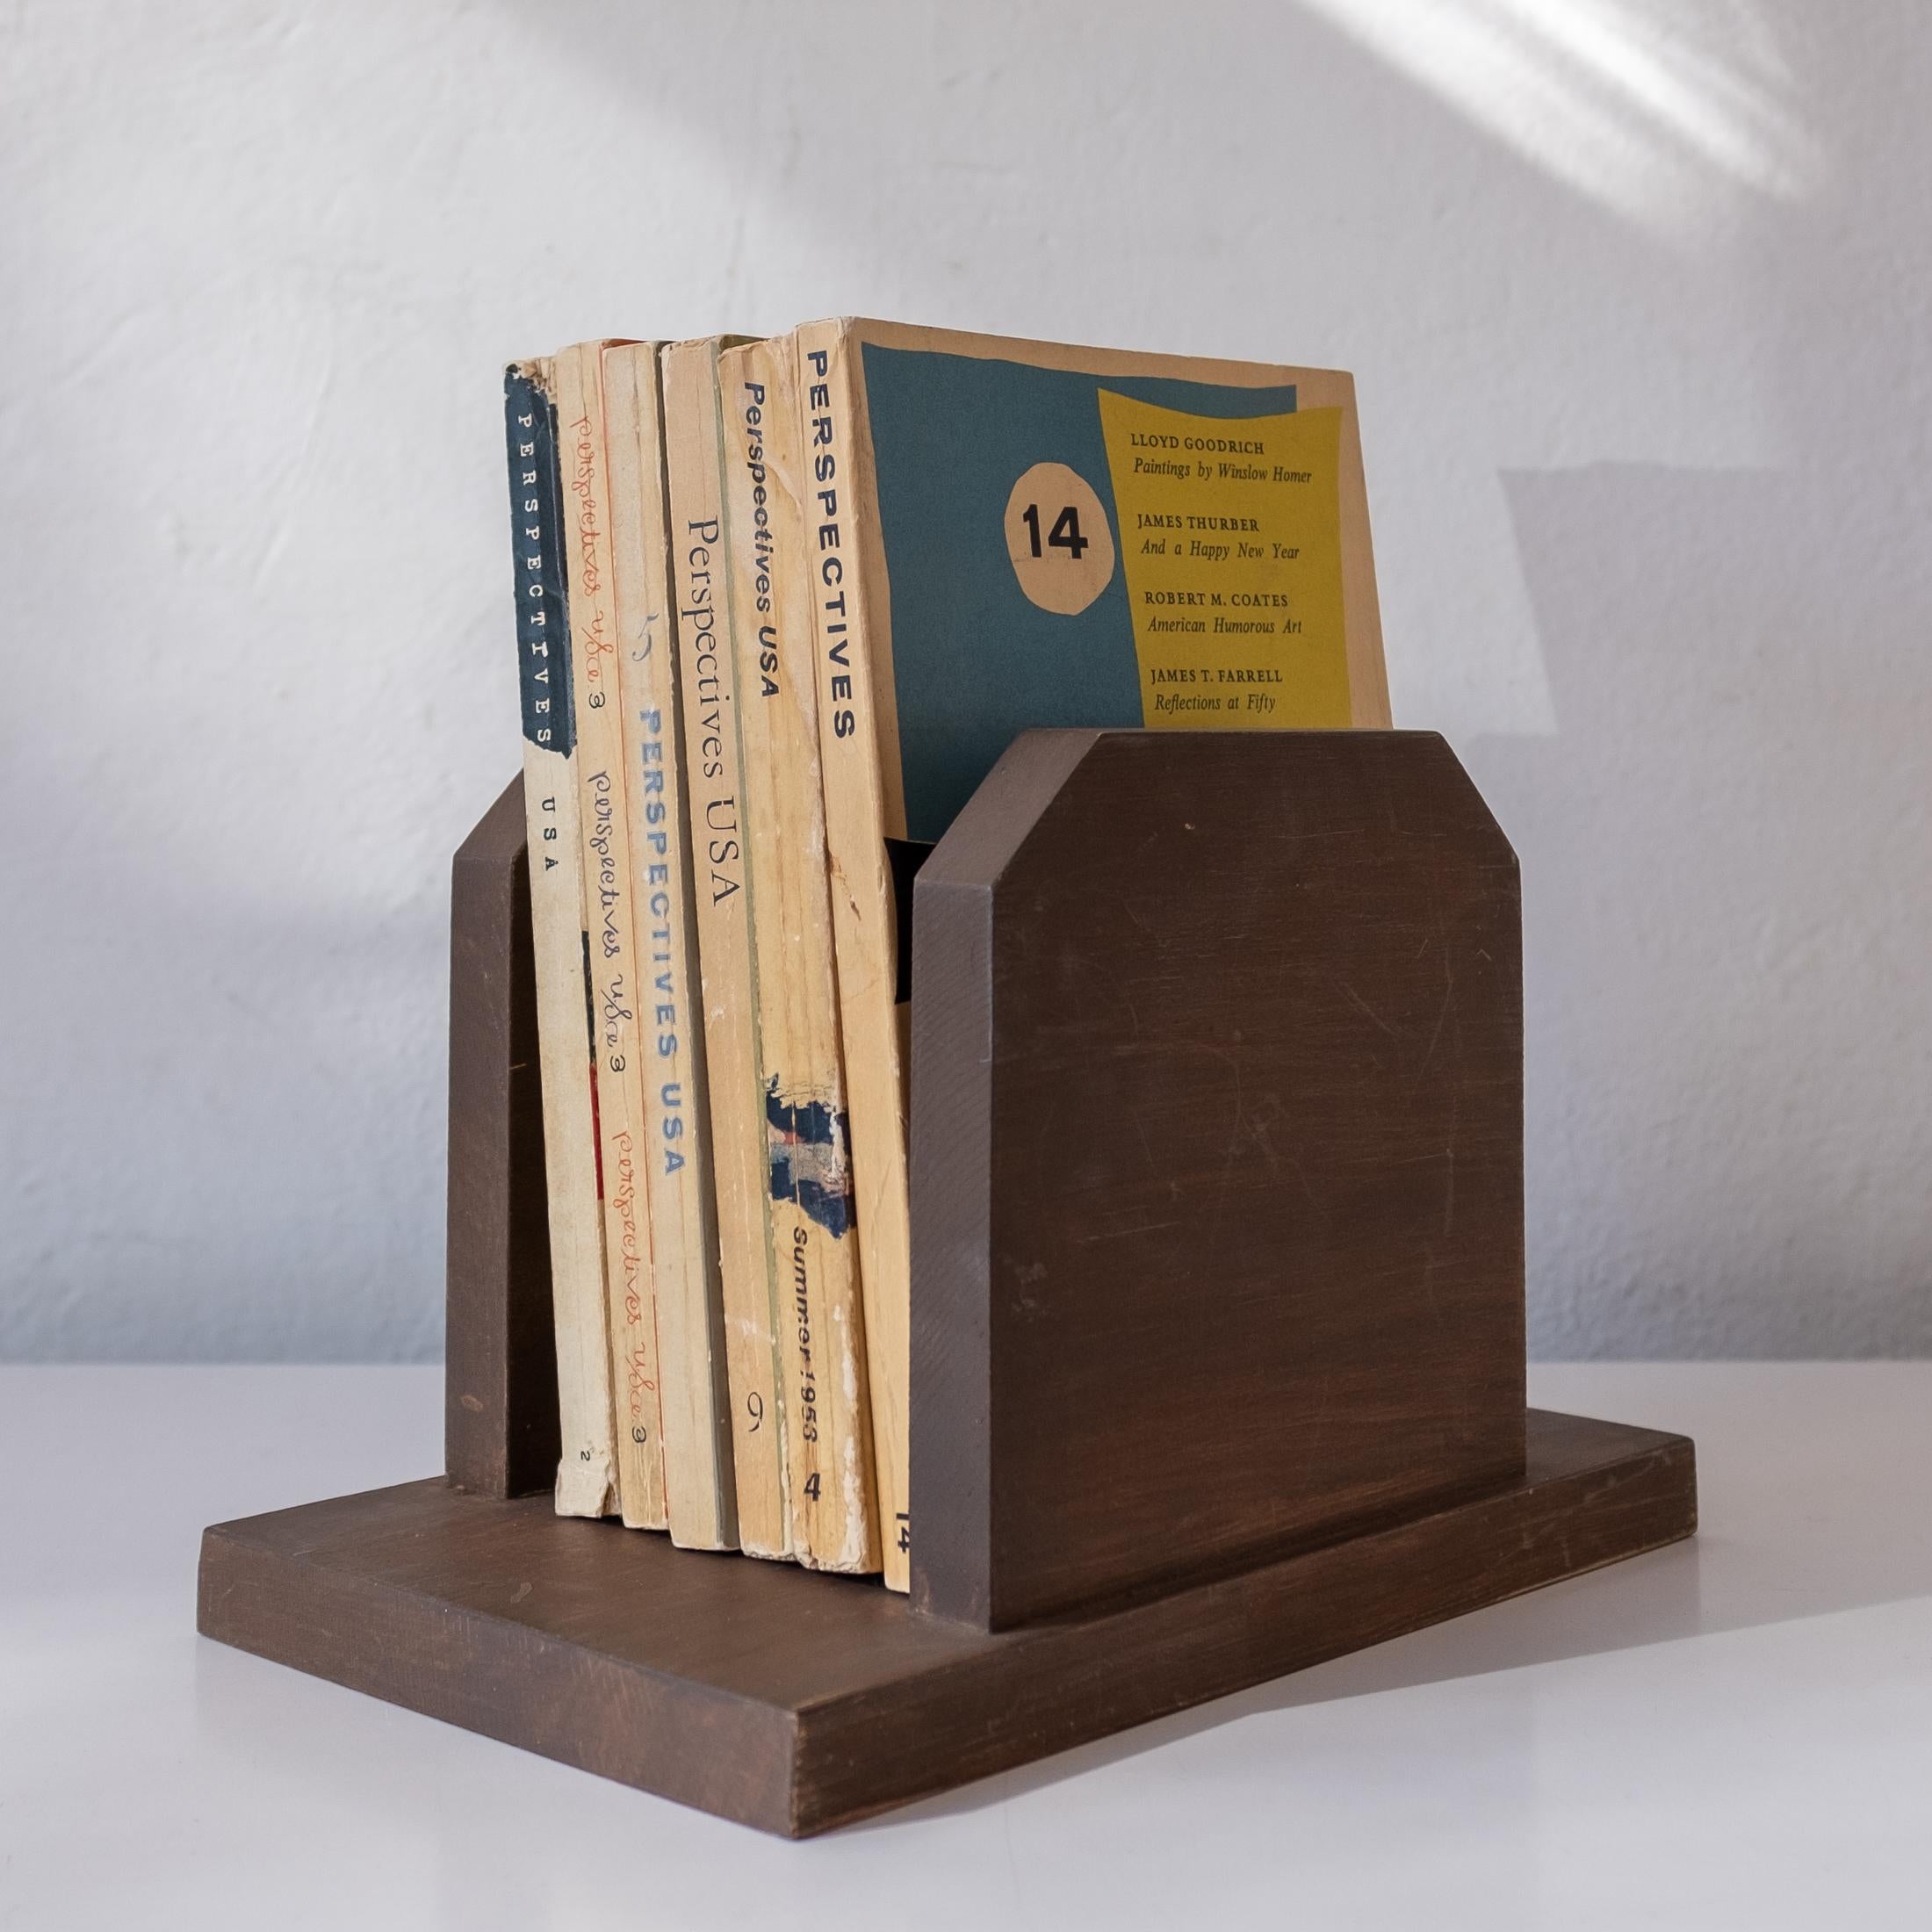 Desktop book or mail holder by John Lloyd Wright (December 12, 1892 – December 20, 1972). This was part of the many furnishings designed by John Lloyd Wright’s House for Mr. Yager Cantwell (1962-63) in Rancho Santa Fe. 

John Lloyd Wright was an